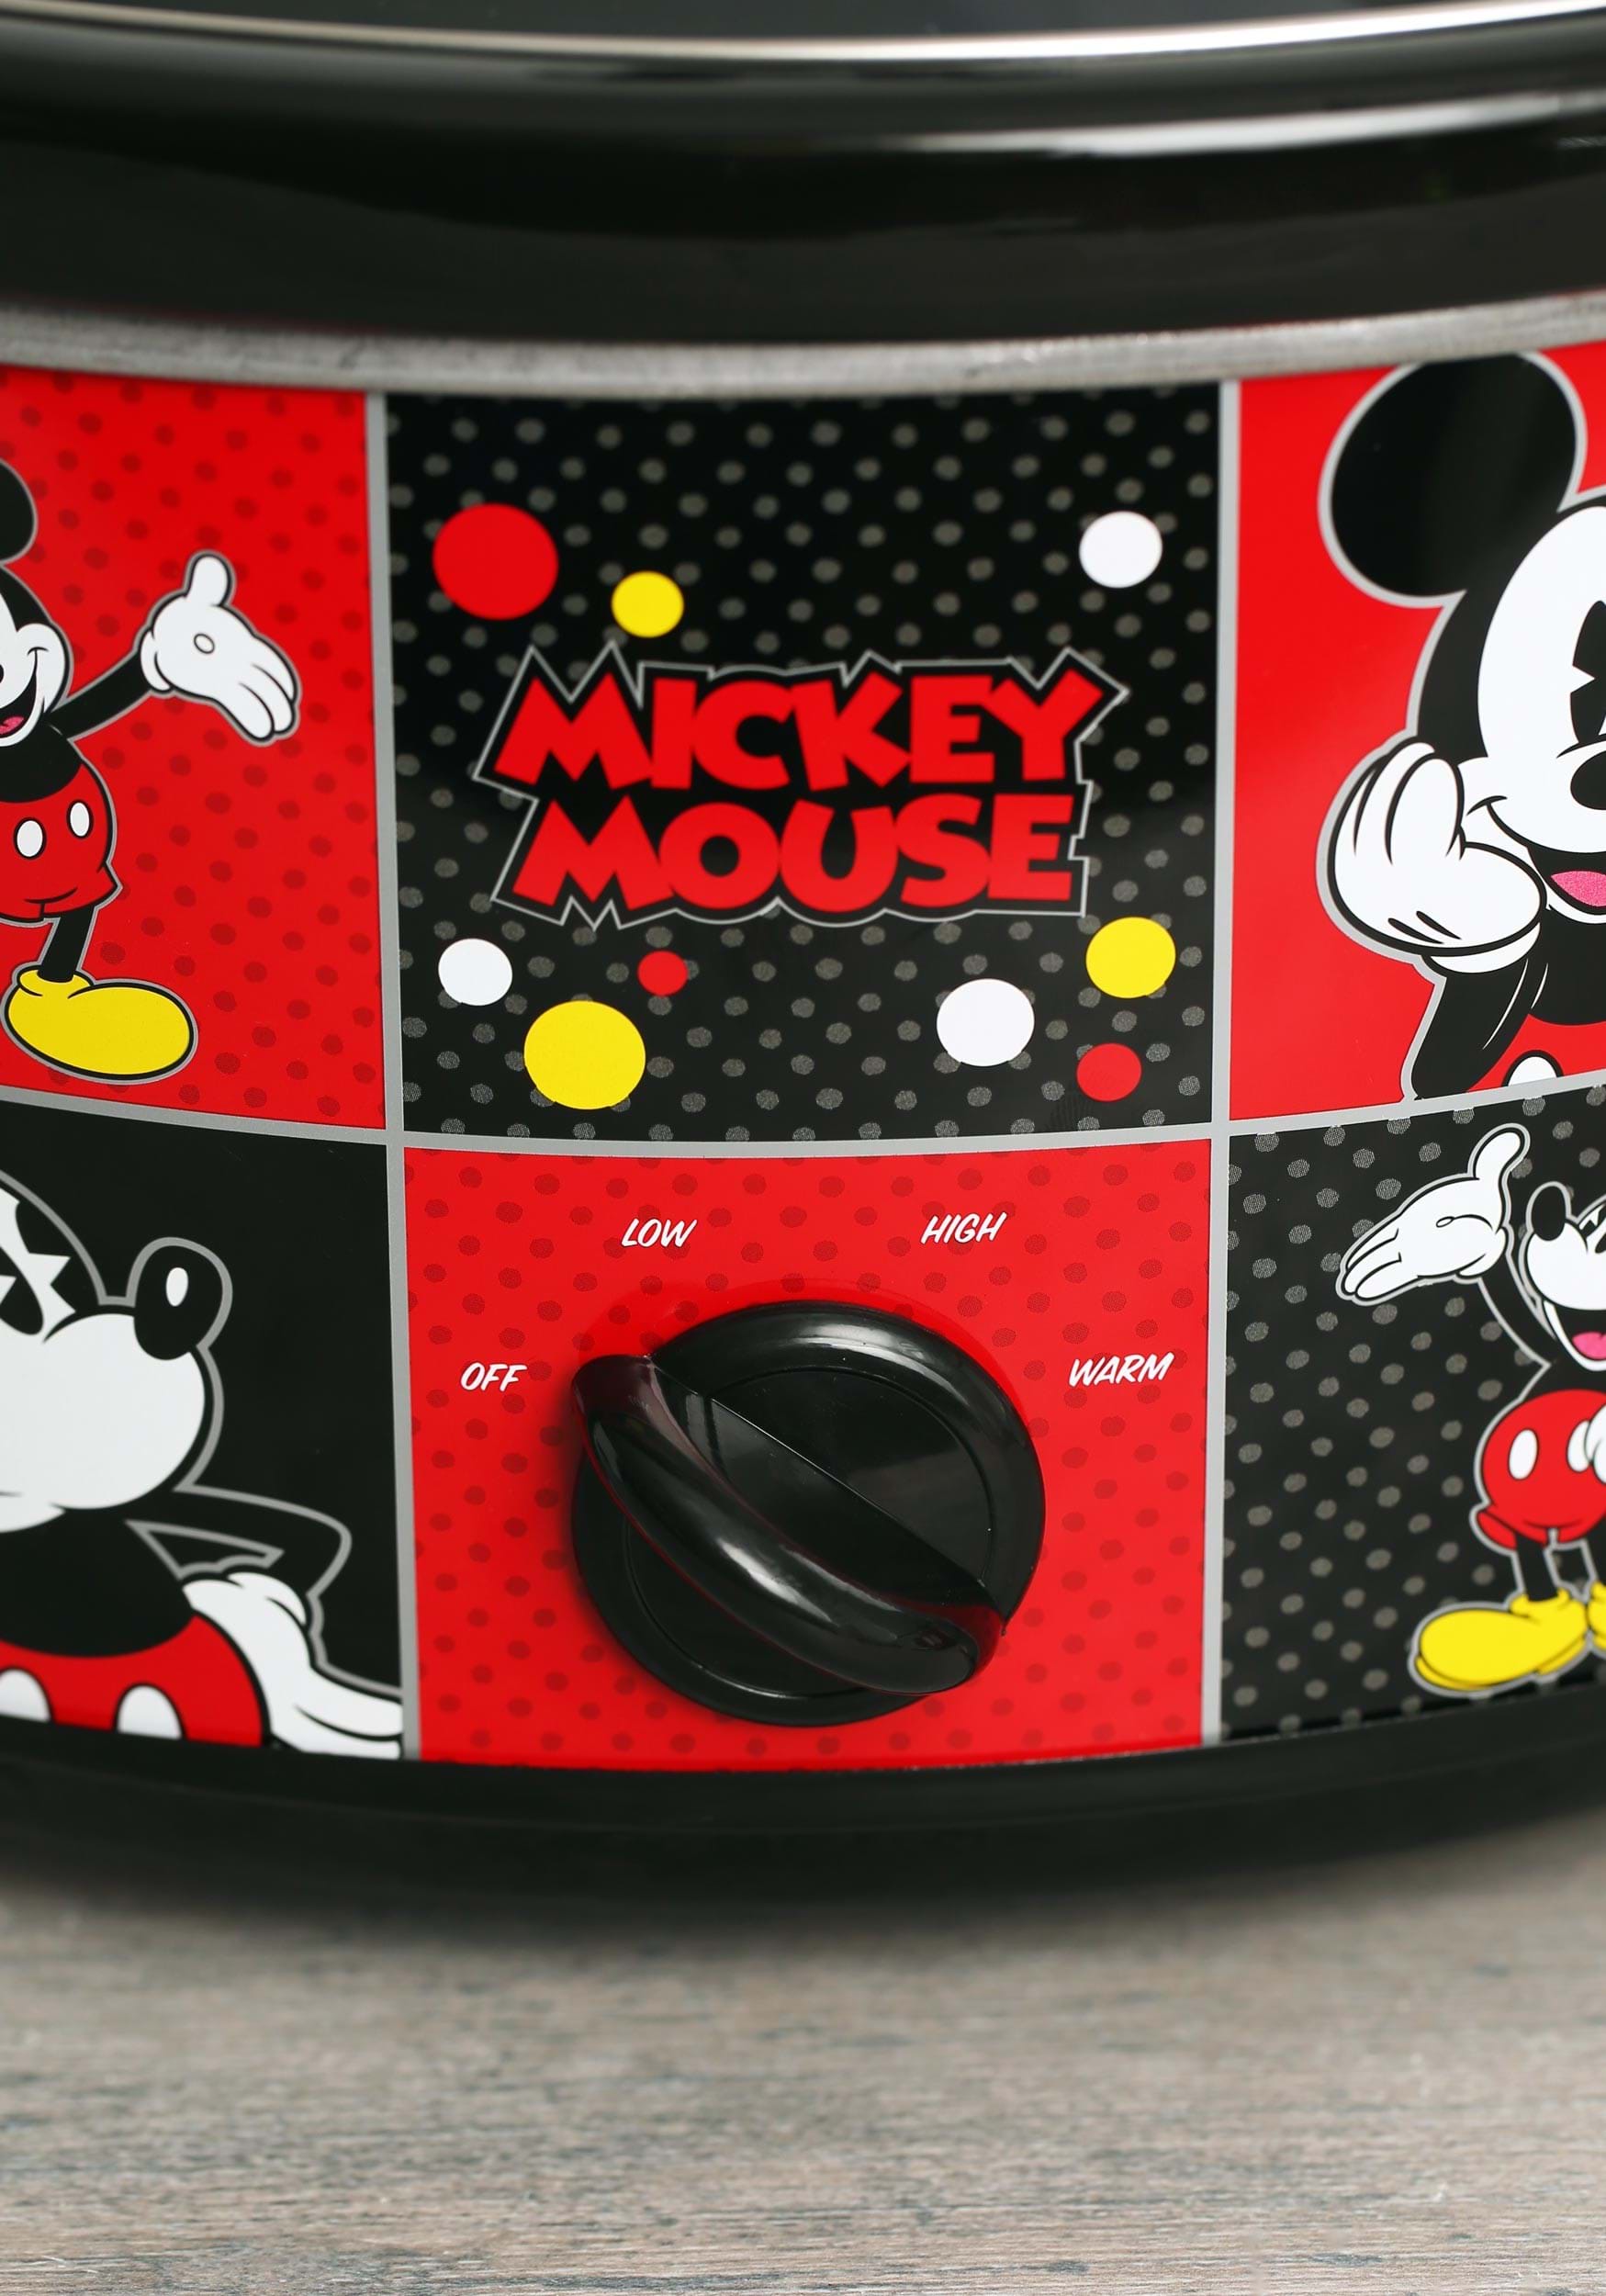 https://images.fun.com/products/49759/2-1-169832/mickey-mouse-5-qt-slow-cooker-w-dipper-alt-4.jpg